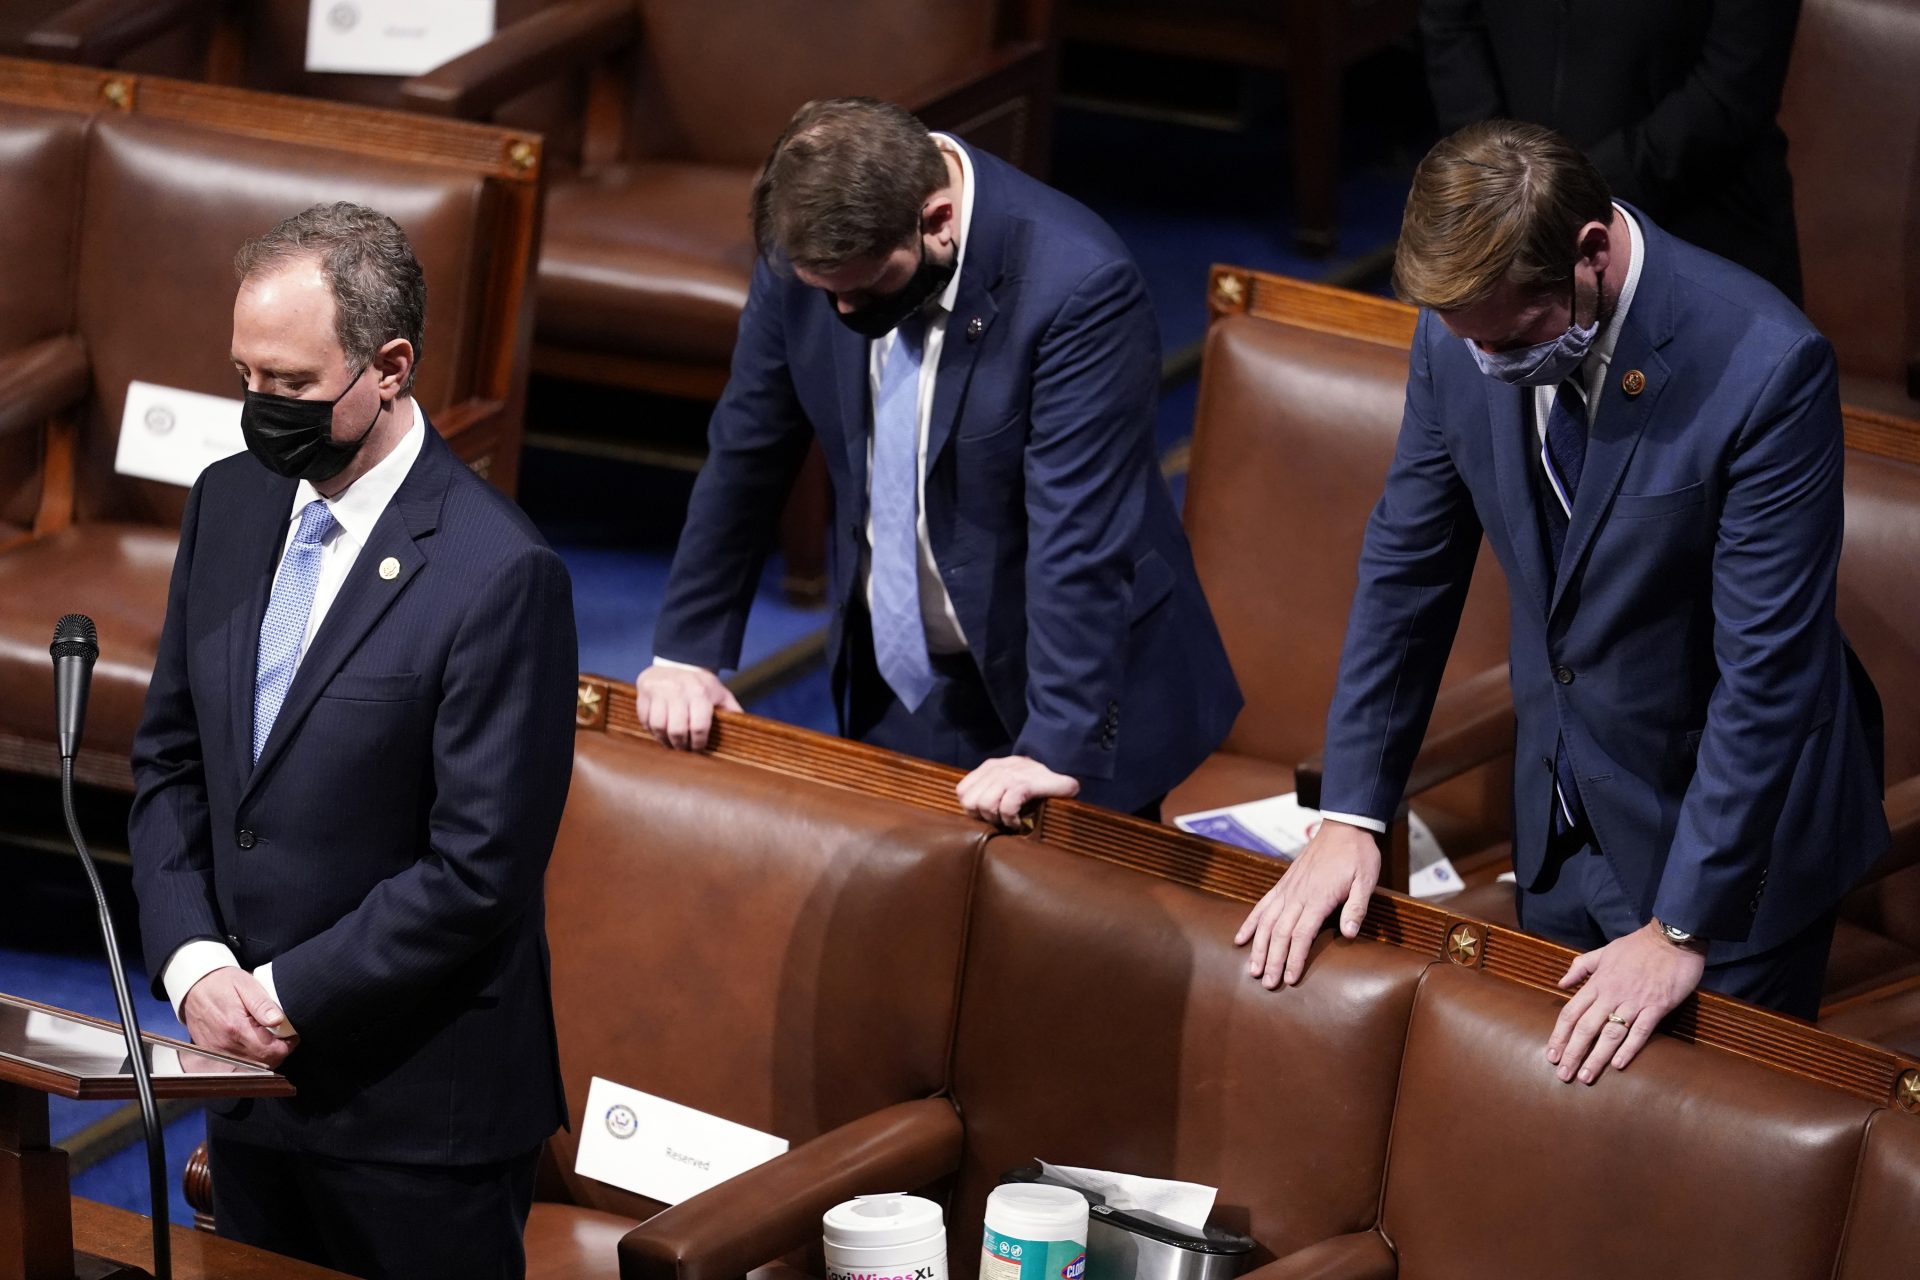 Rep. Adam Schiff, D-Calif., left, bows his head during a closing prayer of a joint session of the House and Senate to confirm Electoral College votes at the Capitol, early Thursday, Jan 7, 2021, in Washington.